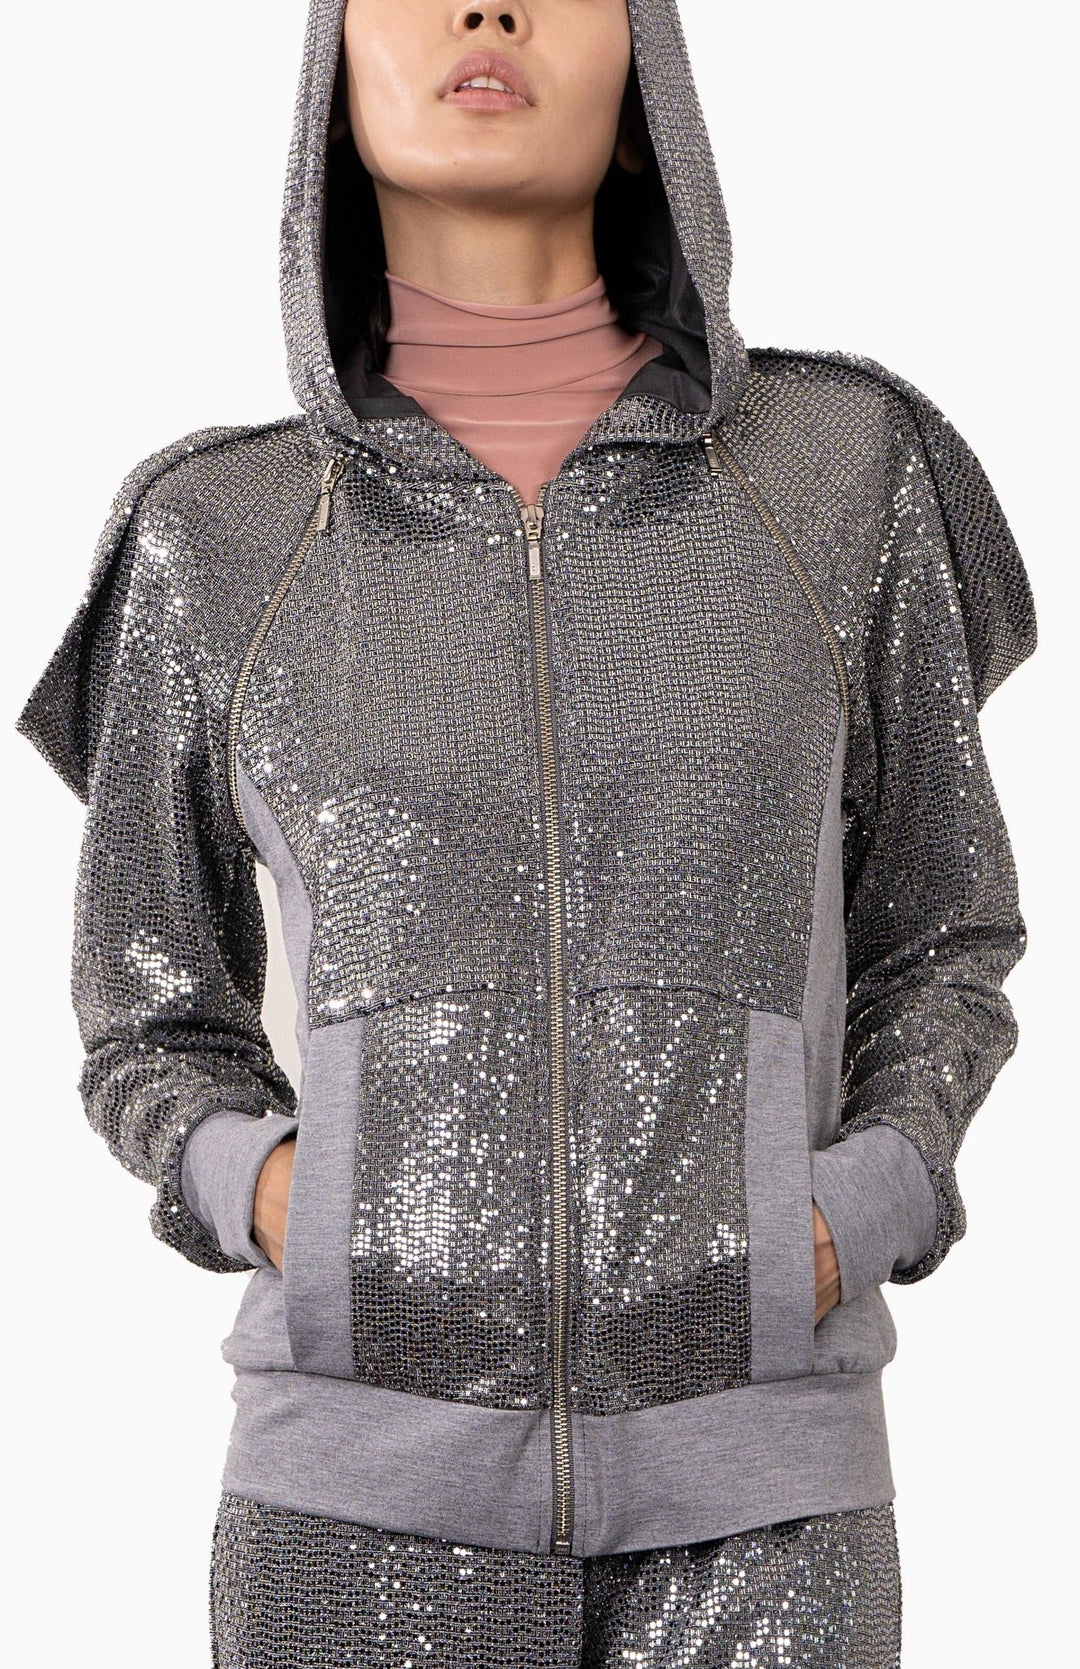 Designer,  silver, futuristic, sequin hoodie with an oversized, lined hood, decorative zippers and draped shoulders. Worn over matching silver sequin joggers